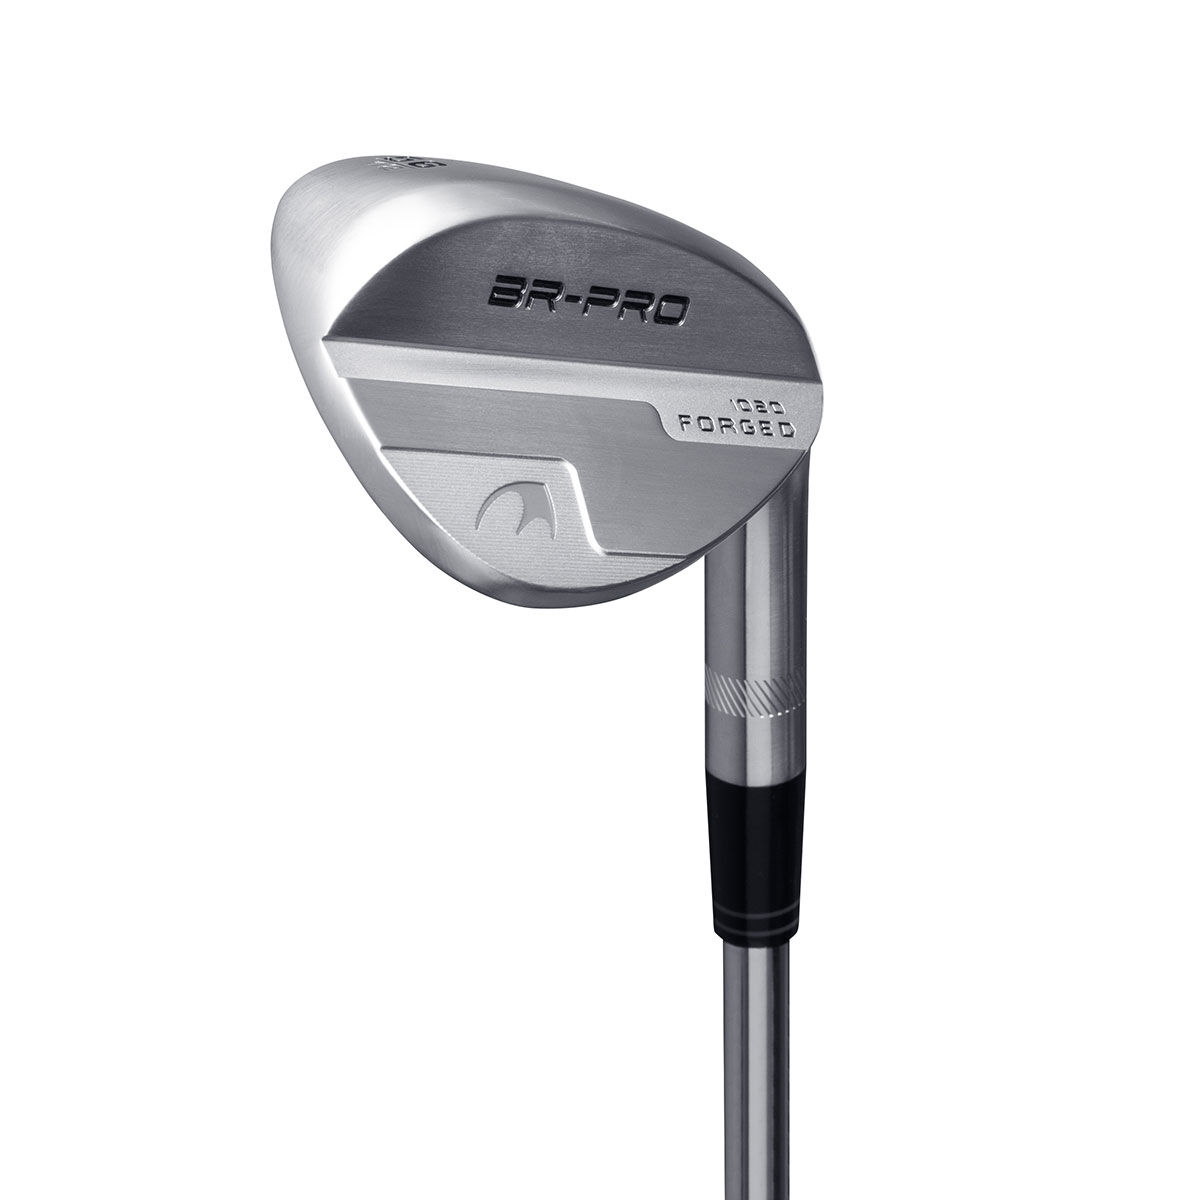 Benross Mens, Silver Br-Pro Forged Golf Wedge, Right Hand, 58°, Standard, Steel, Size: 58" | American Golf von Benross